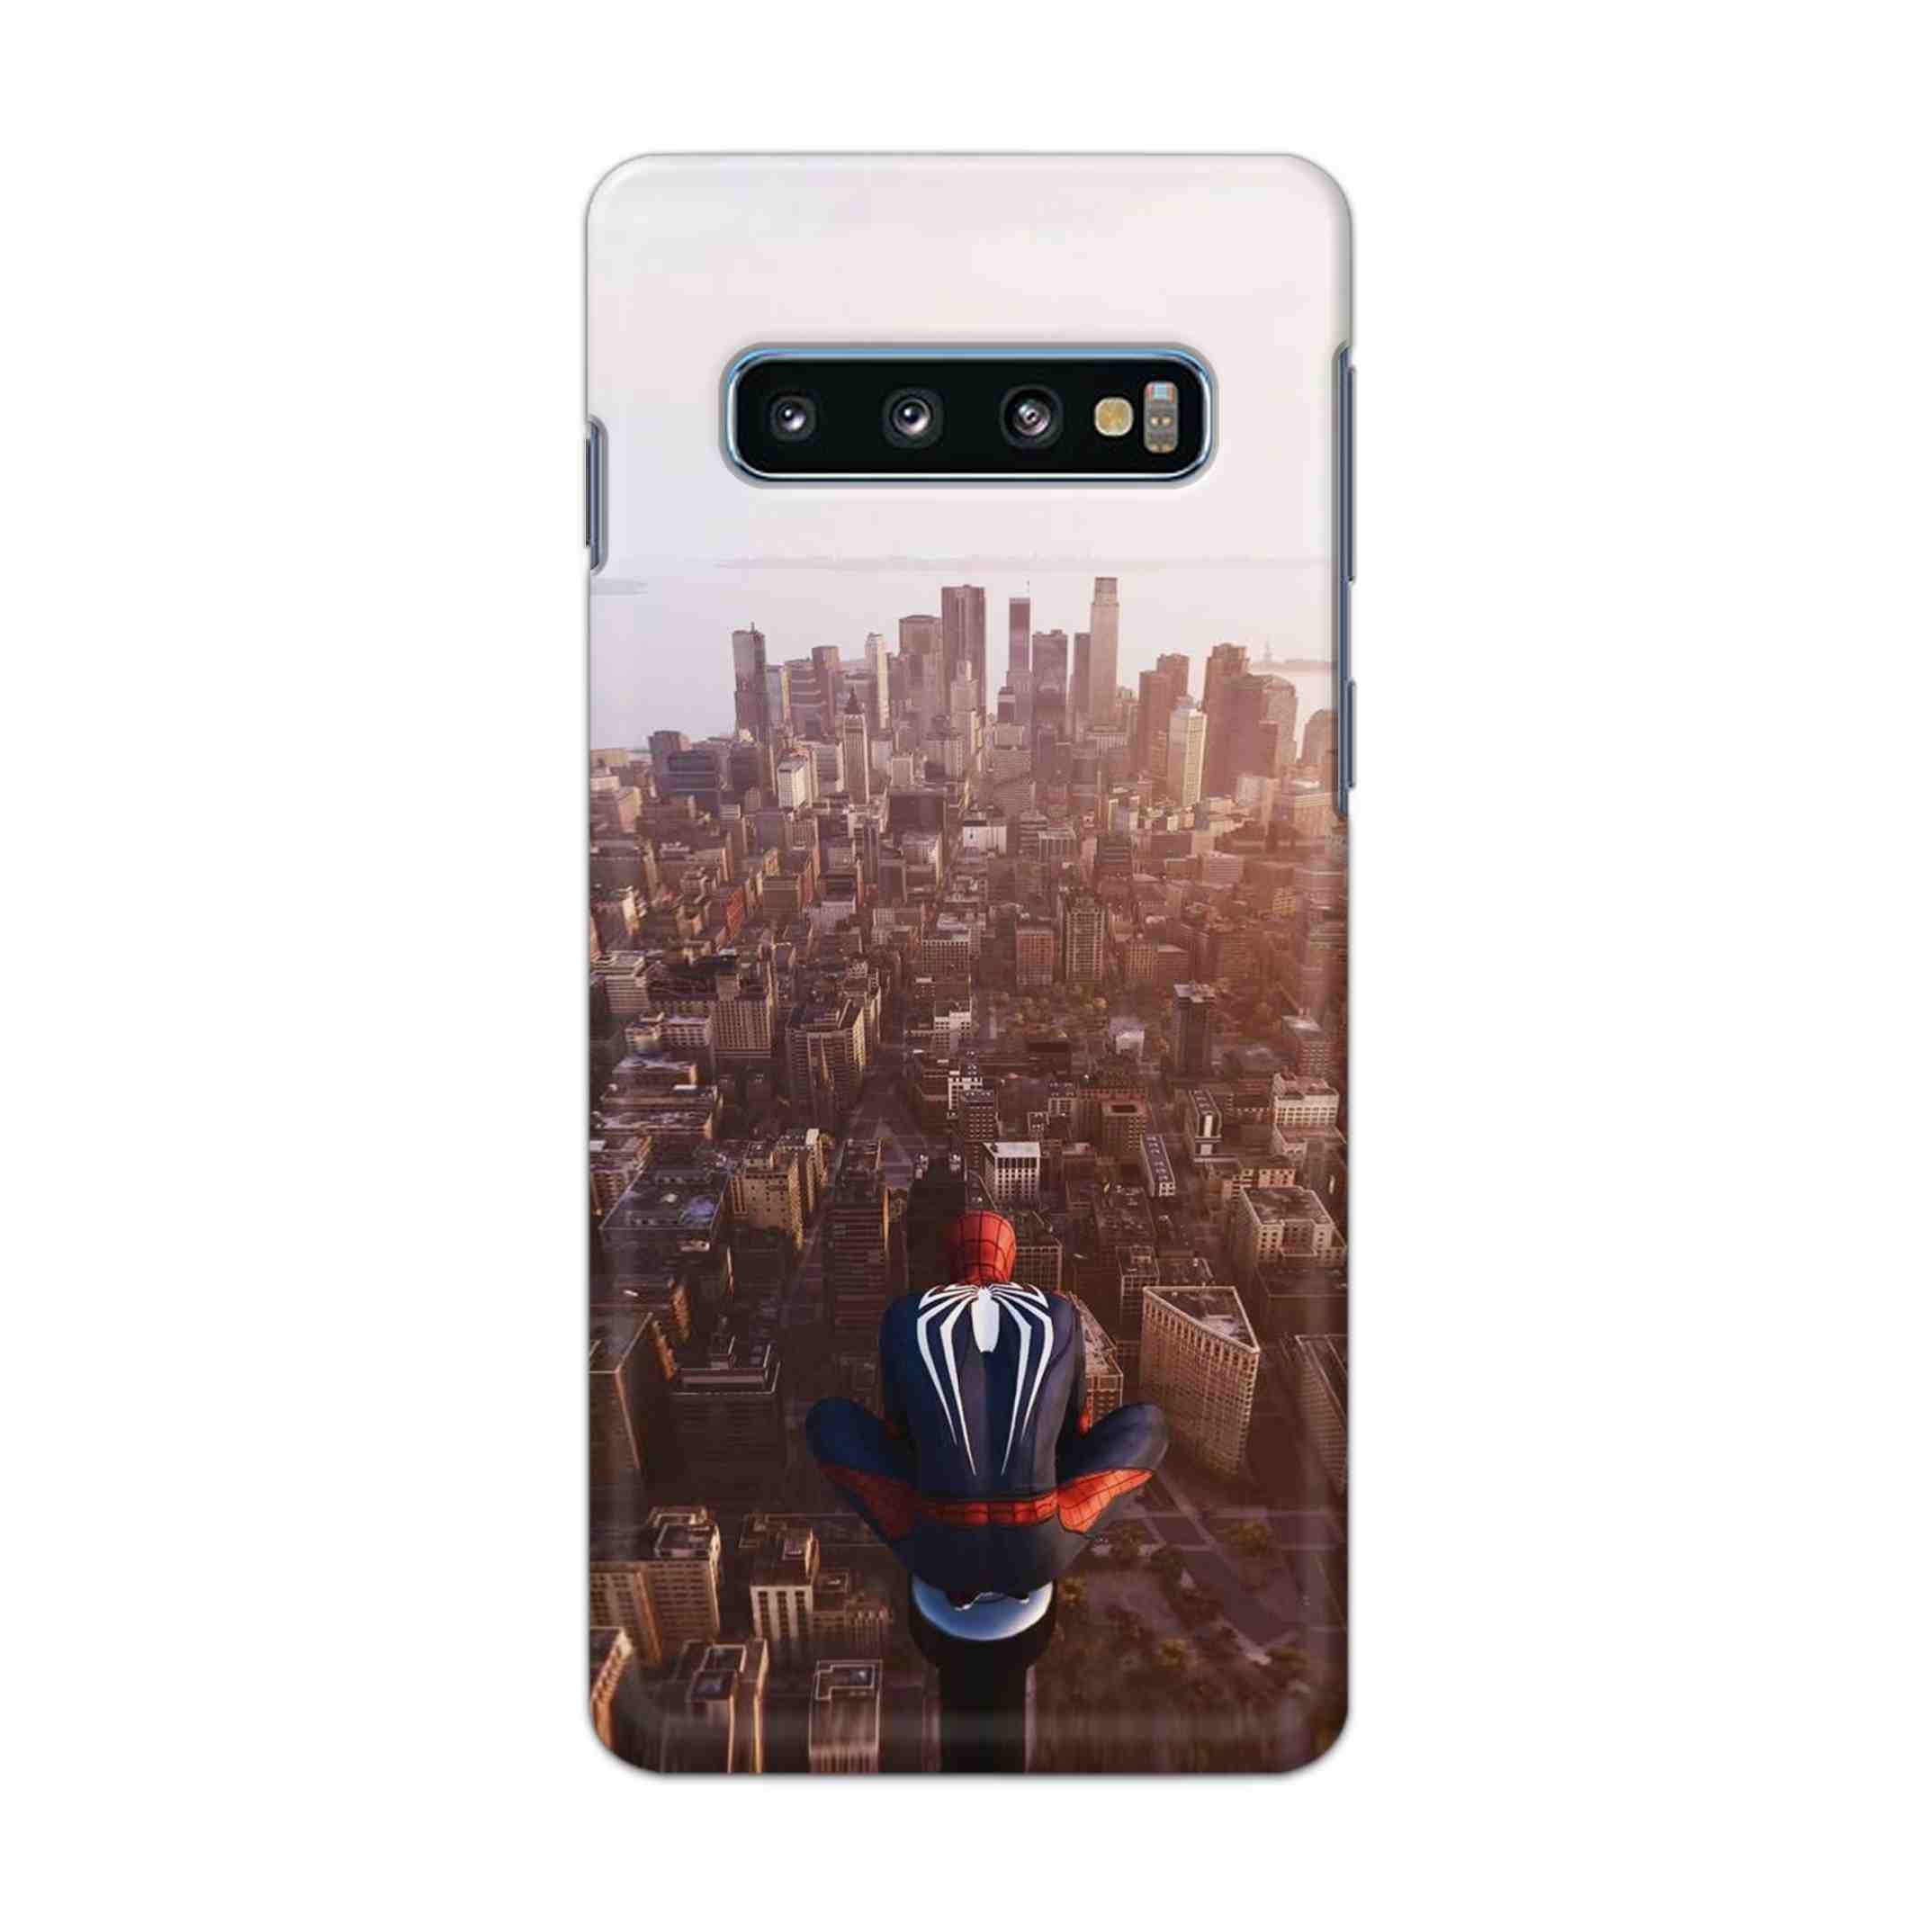 Buy City Of Spiderman Hard Back Mobile Phone Case Cover For Samsung Galaxy S10 Plus Online